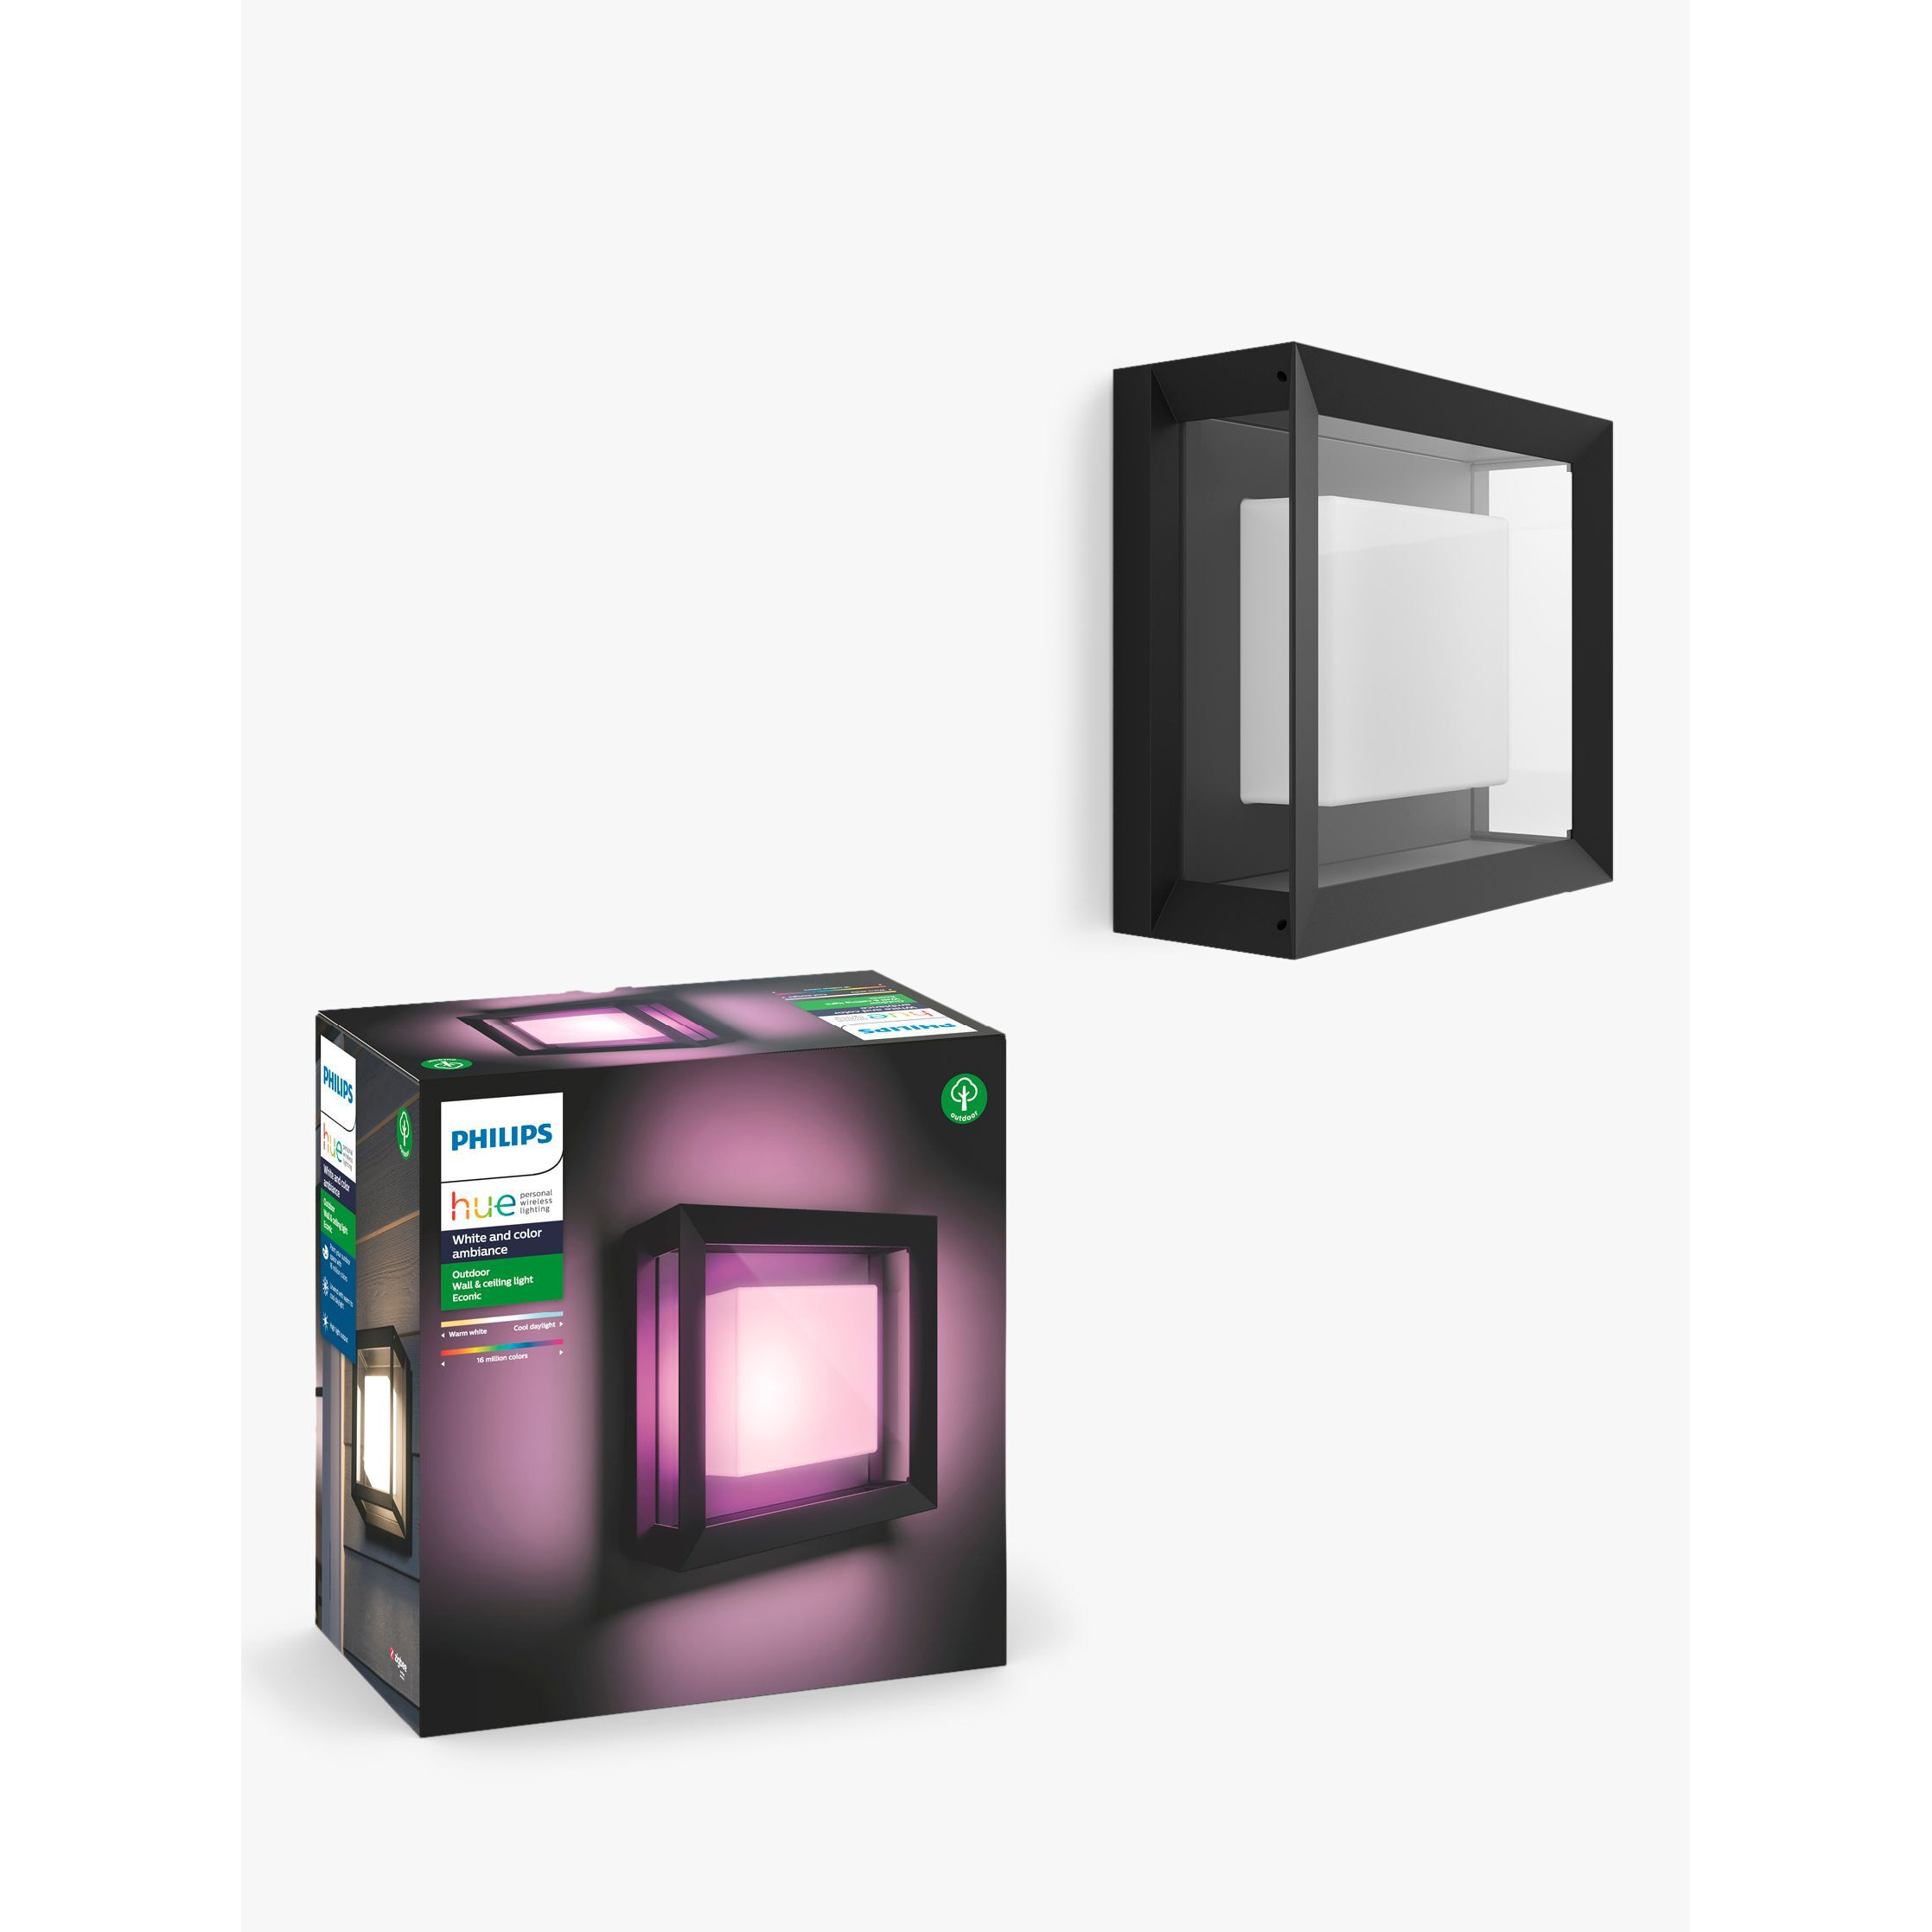 Philips Hue White and Colour Ambiance Econic LED Smart Outdoor Wall Light, Black - image 1